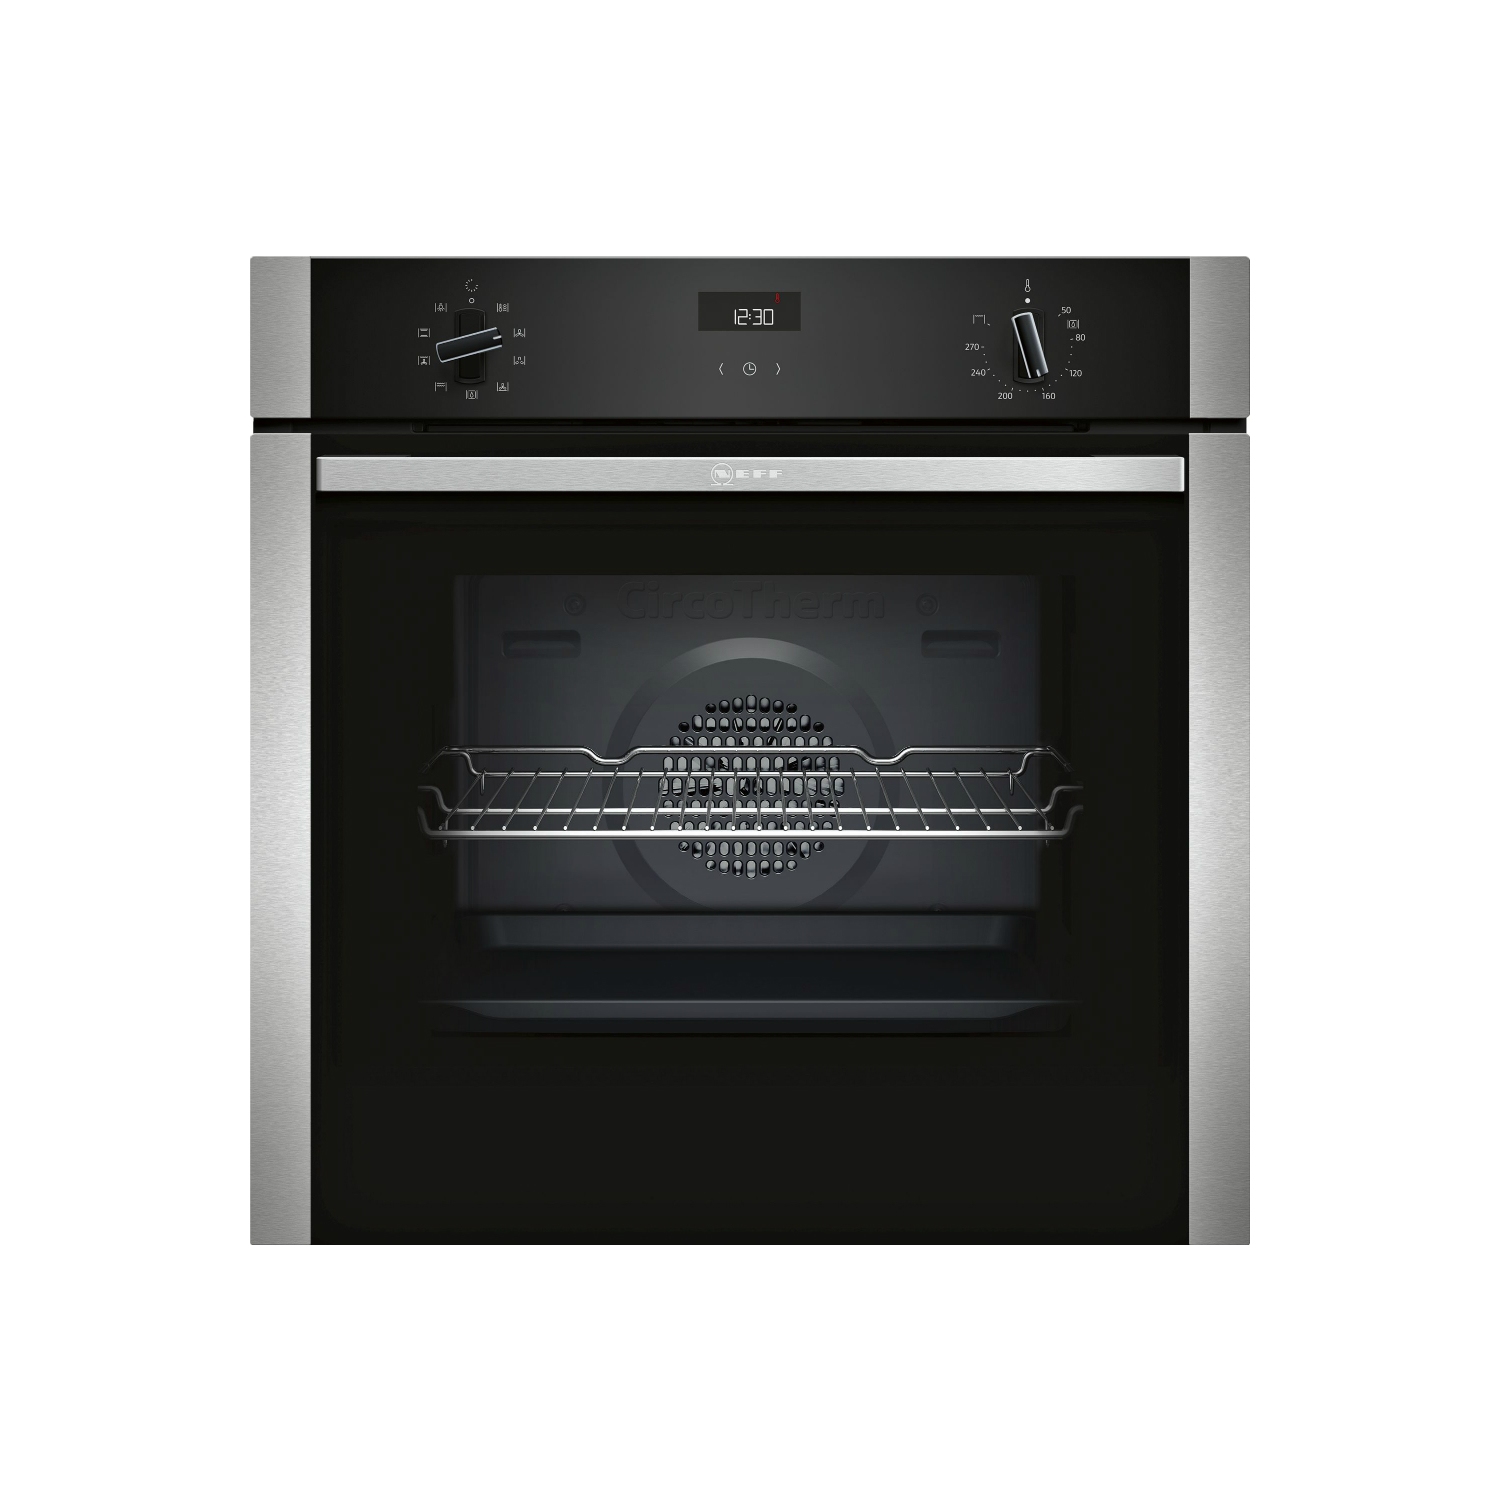 Neff B1ACE4HN0B 59.4cm Built In Electric CircoTherm Single Oven - BLACK/STEEL - 0